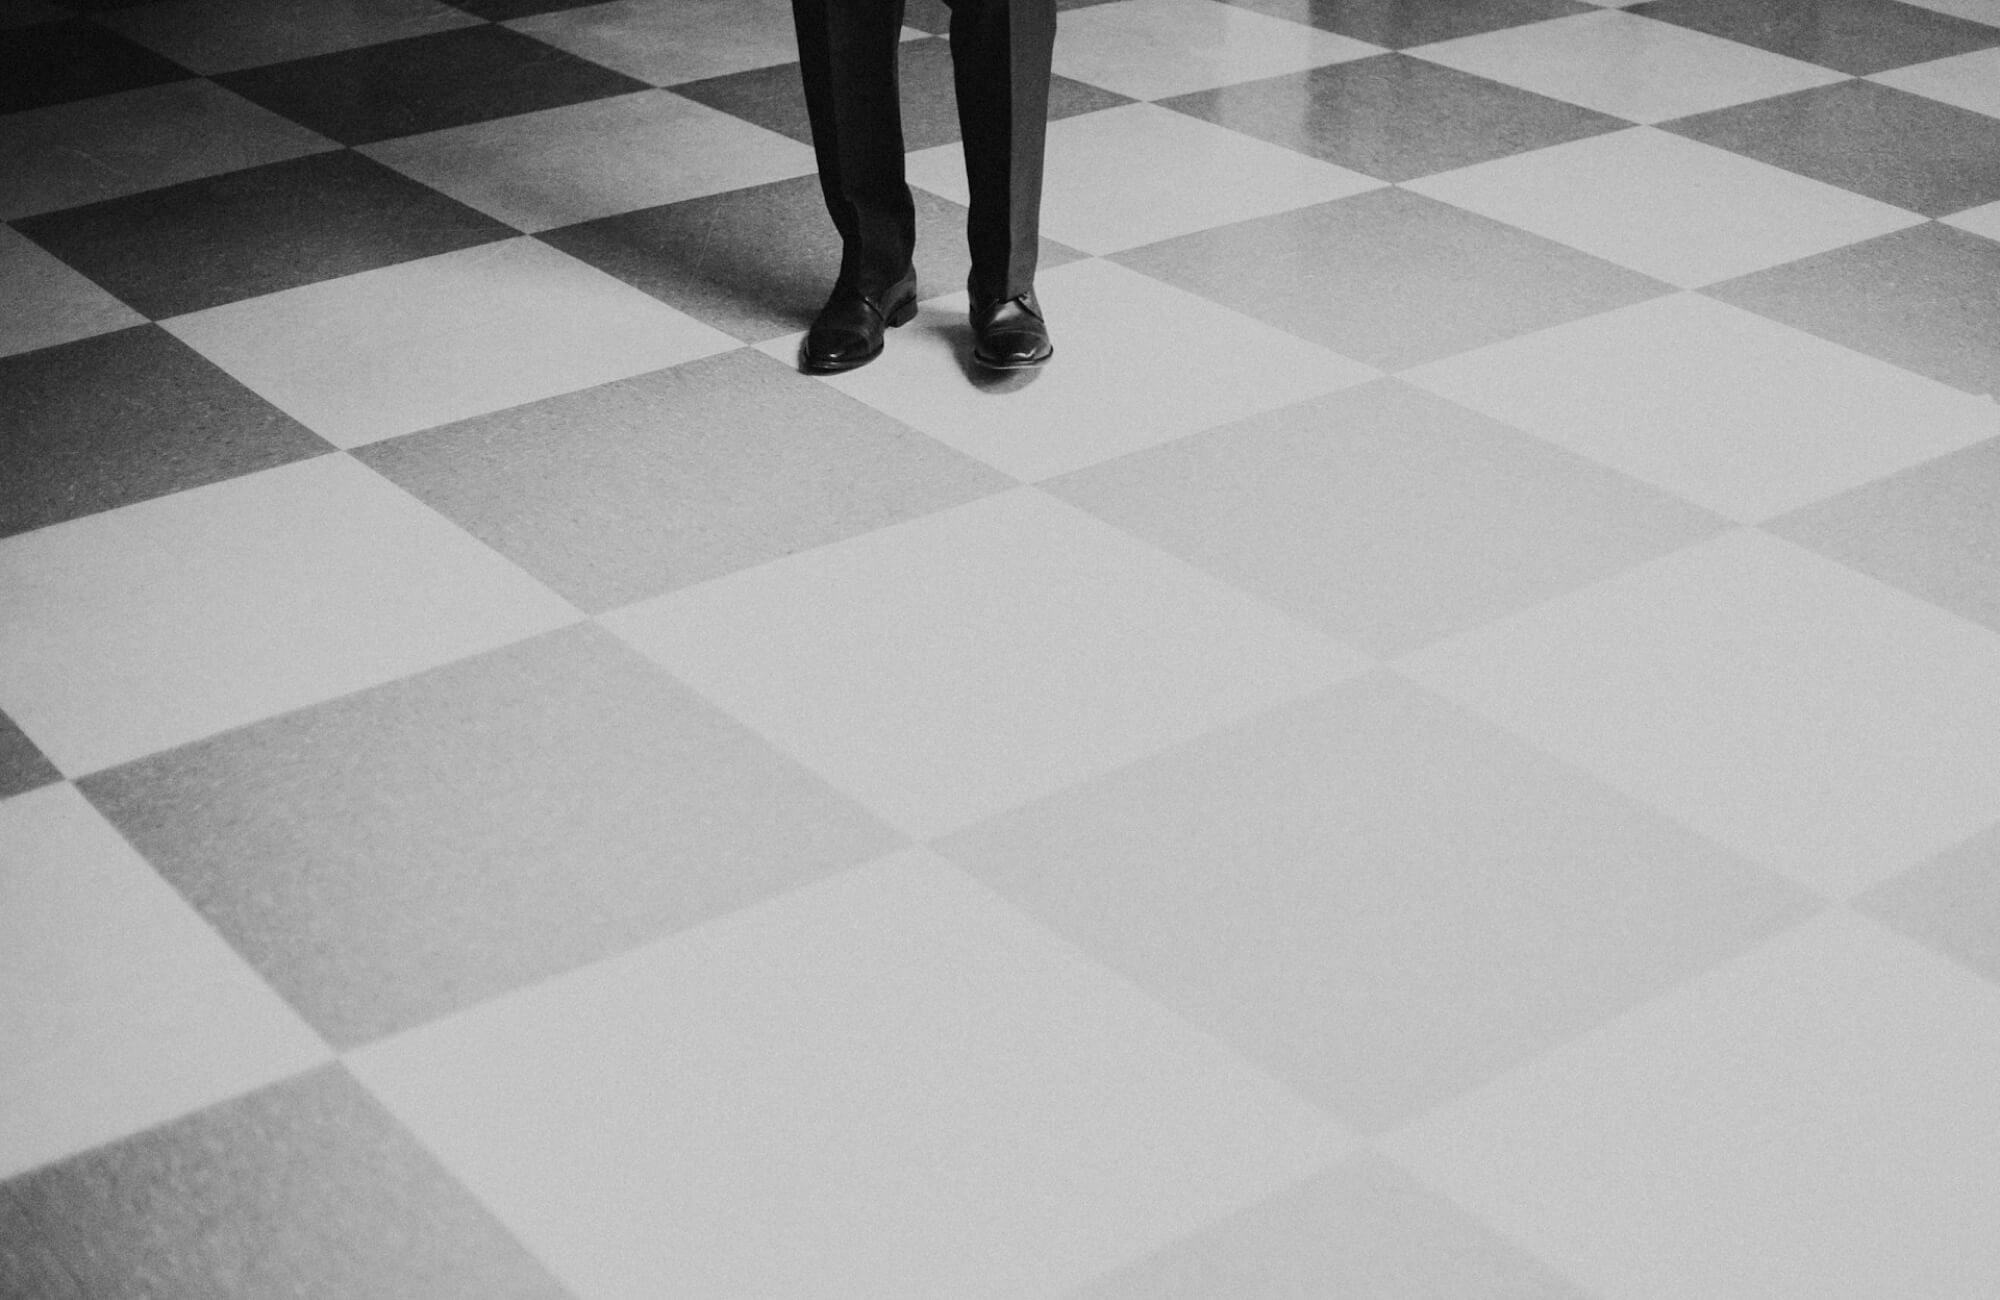 Monochrome checkerboard floor with white and black tiles, with a person in black dress shoes stepping into view